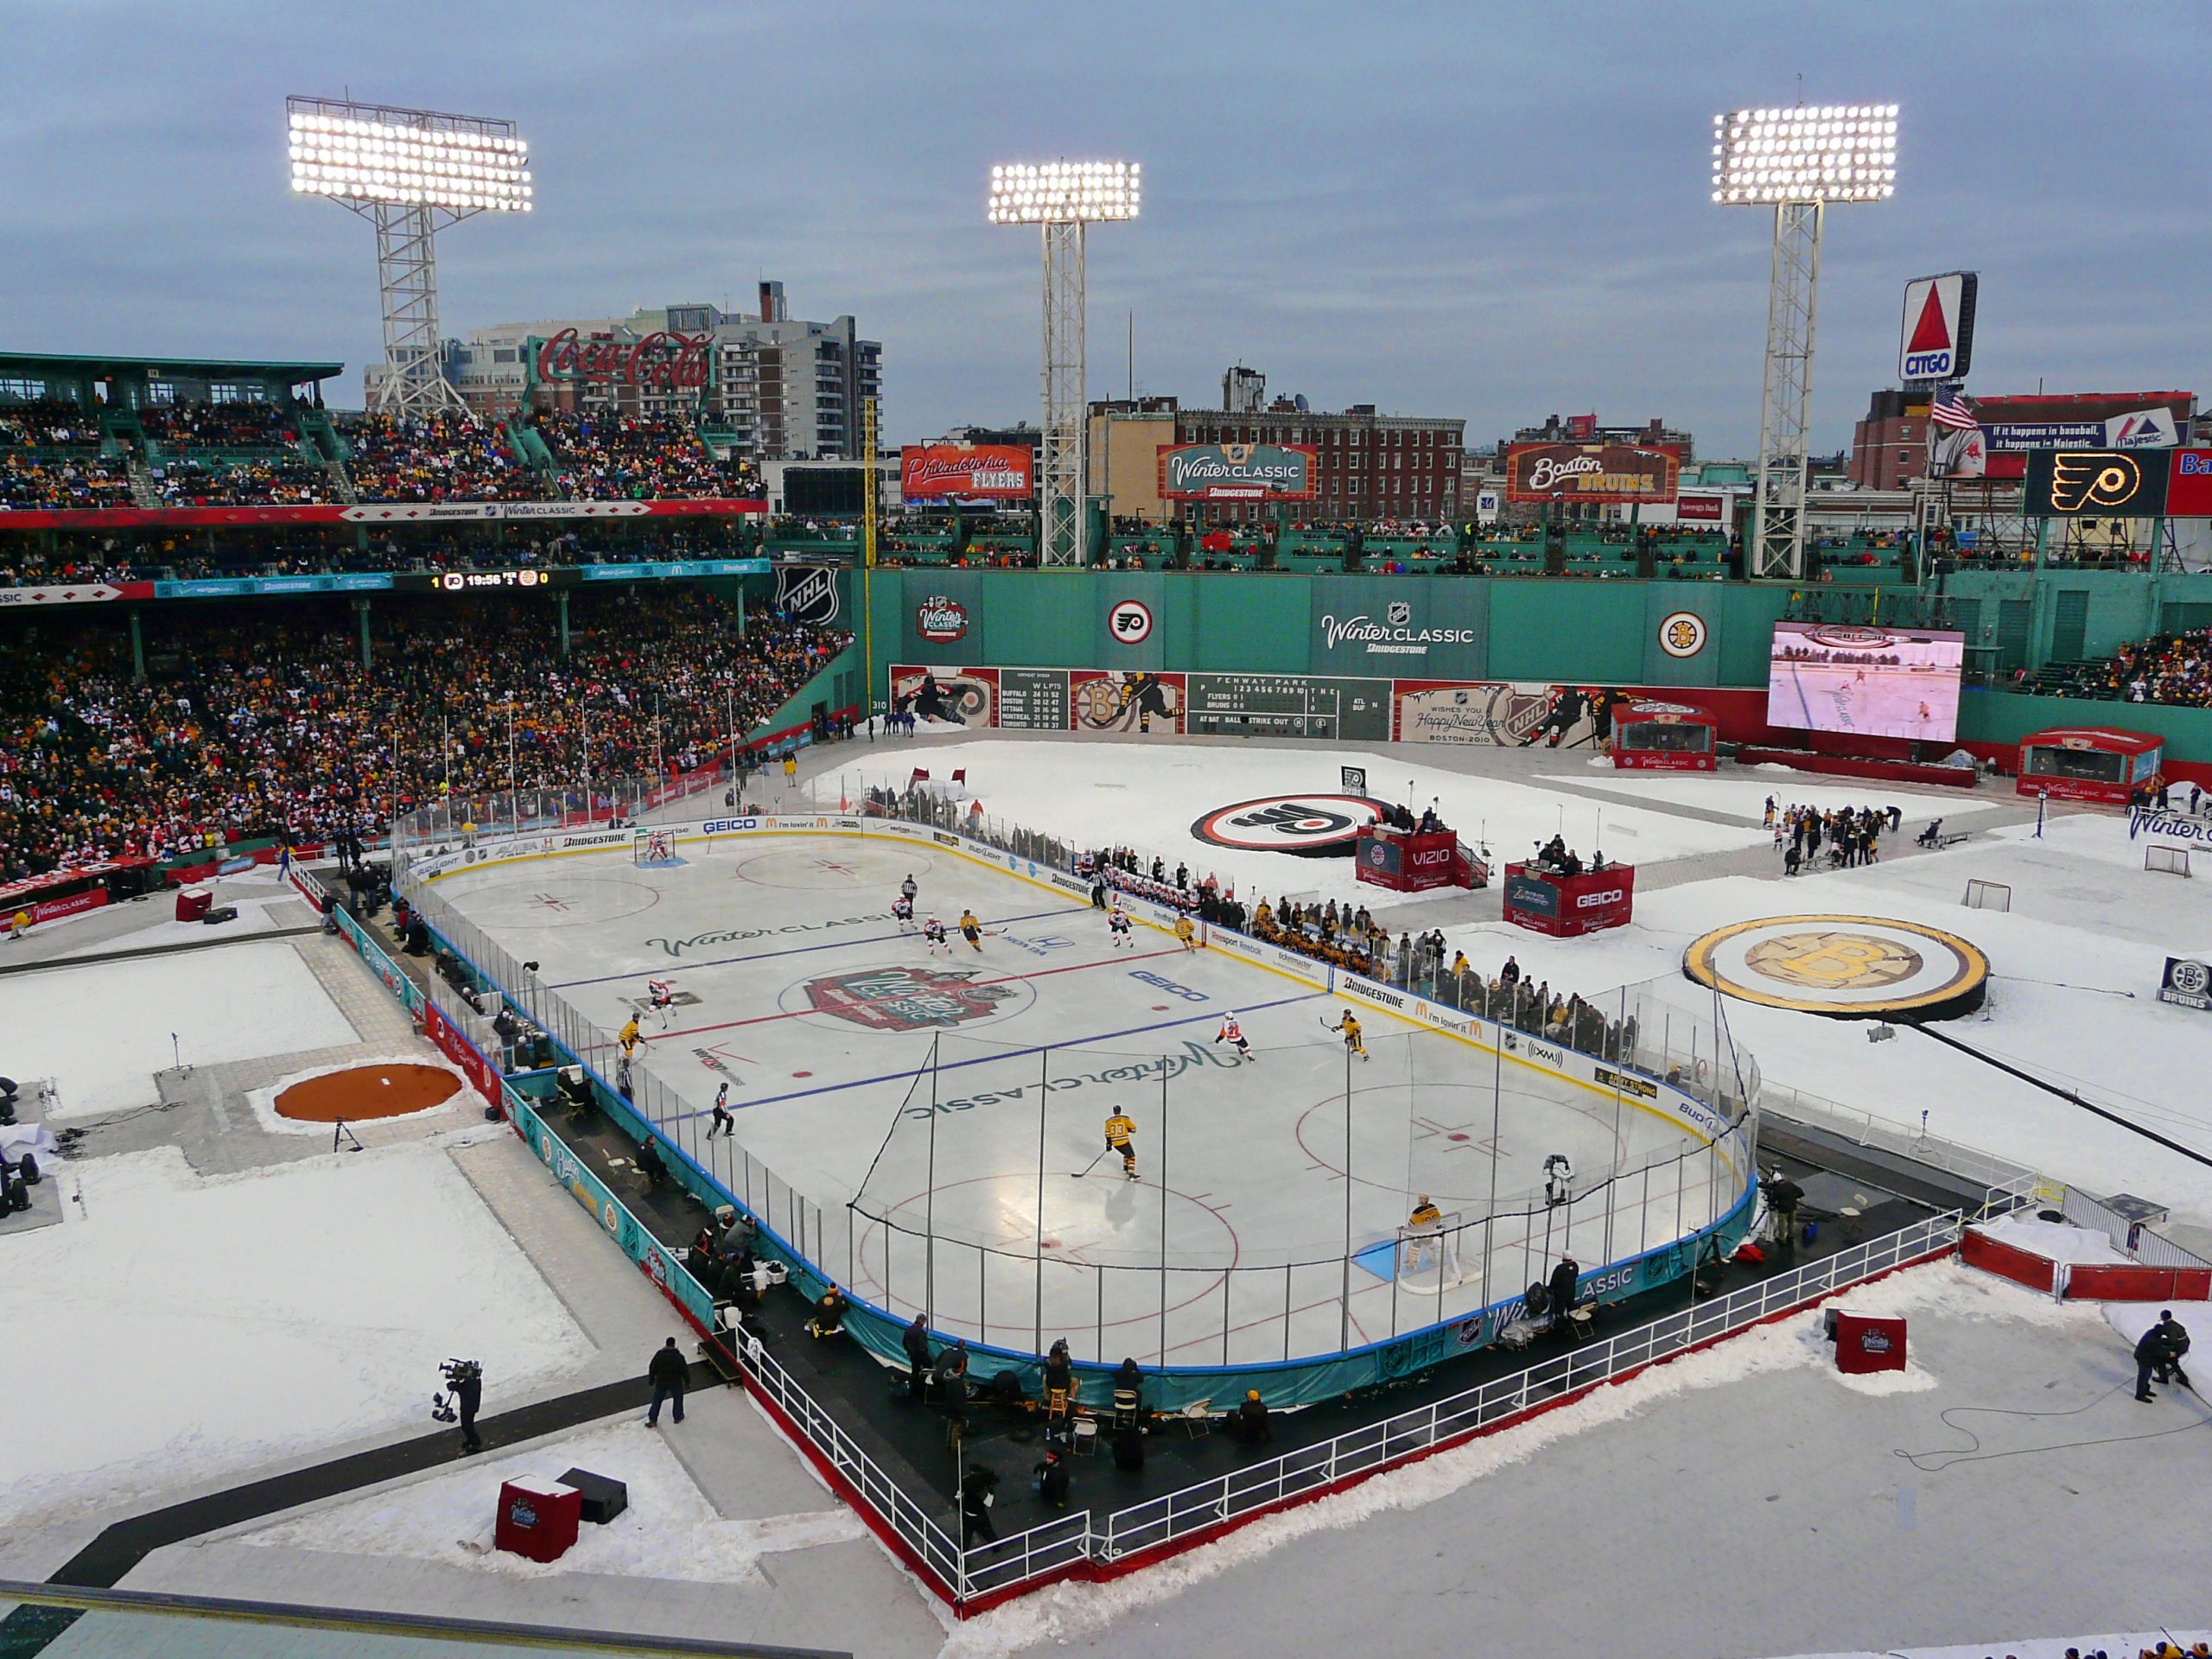 Winter Classic: Here's the scene at Fenway Park as the Penguins